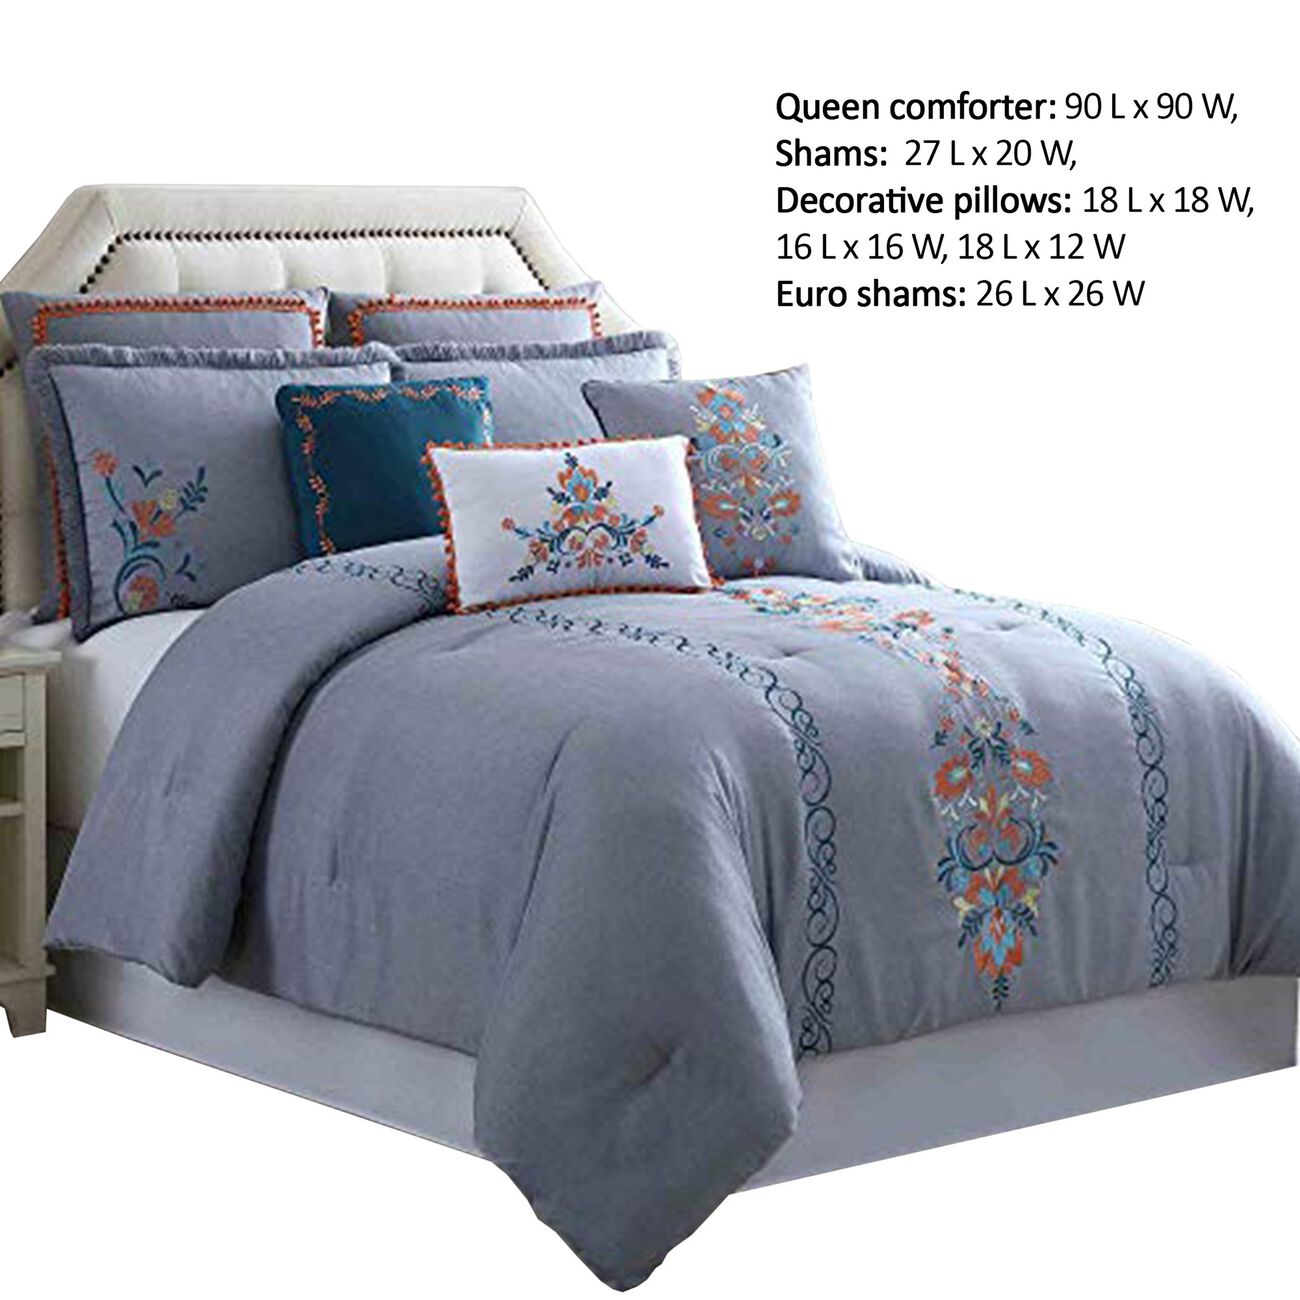 Odense 8 Piece Queen Comforter Set with Floral Embroidery The Urban Port, Multicolor